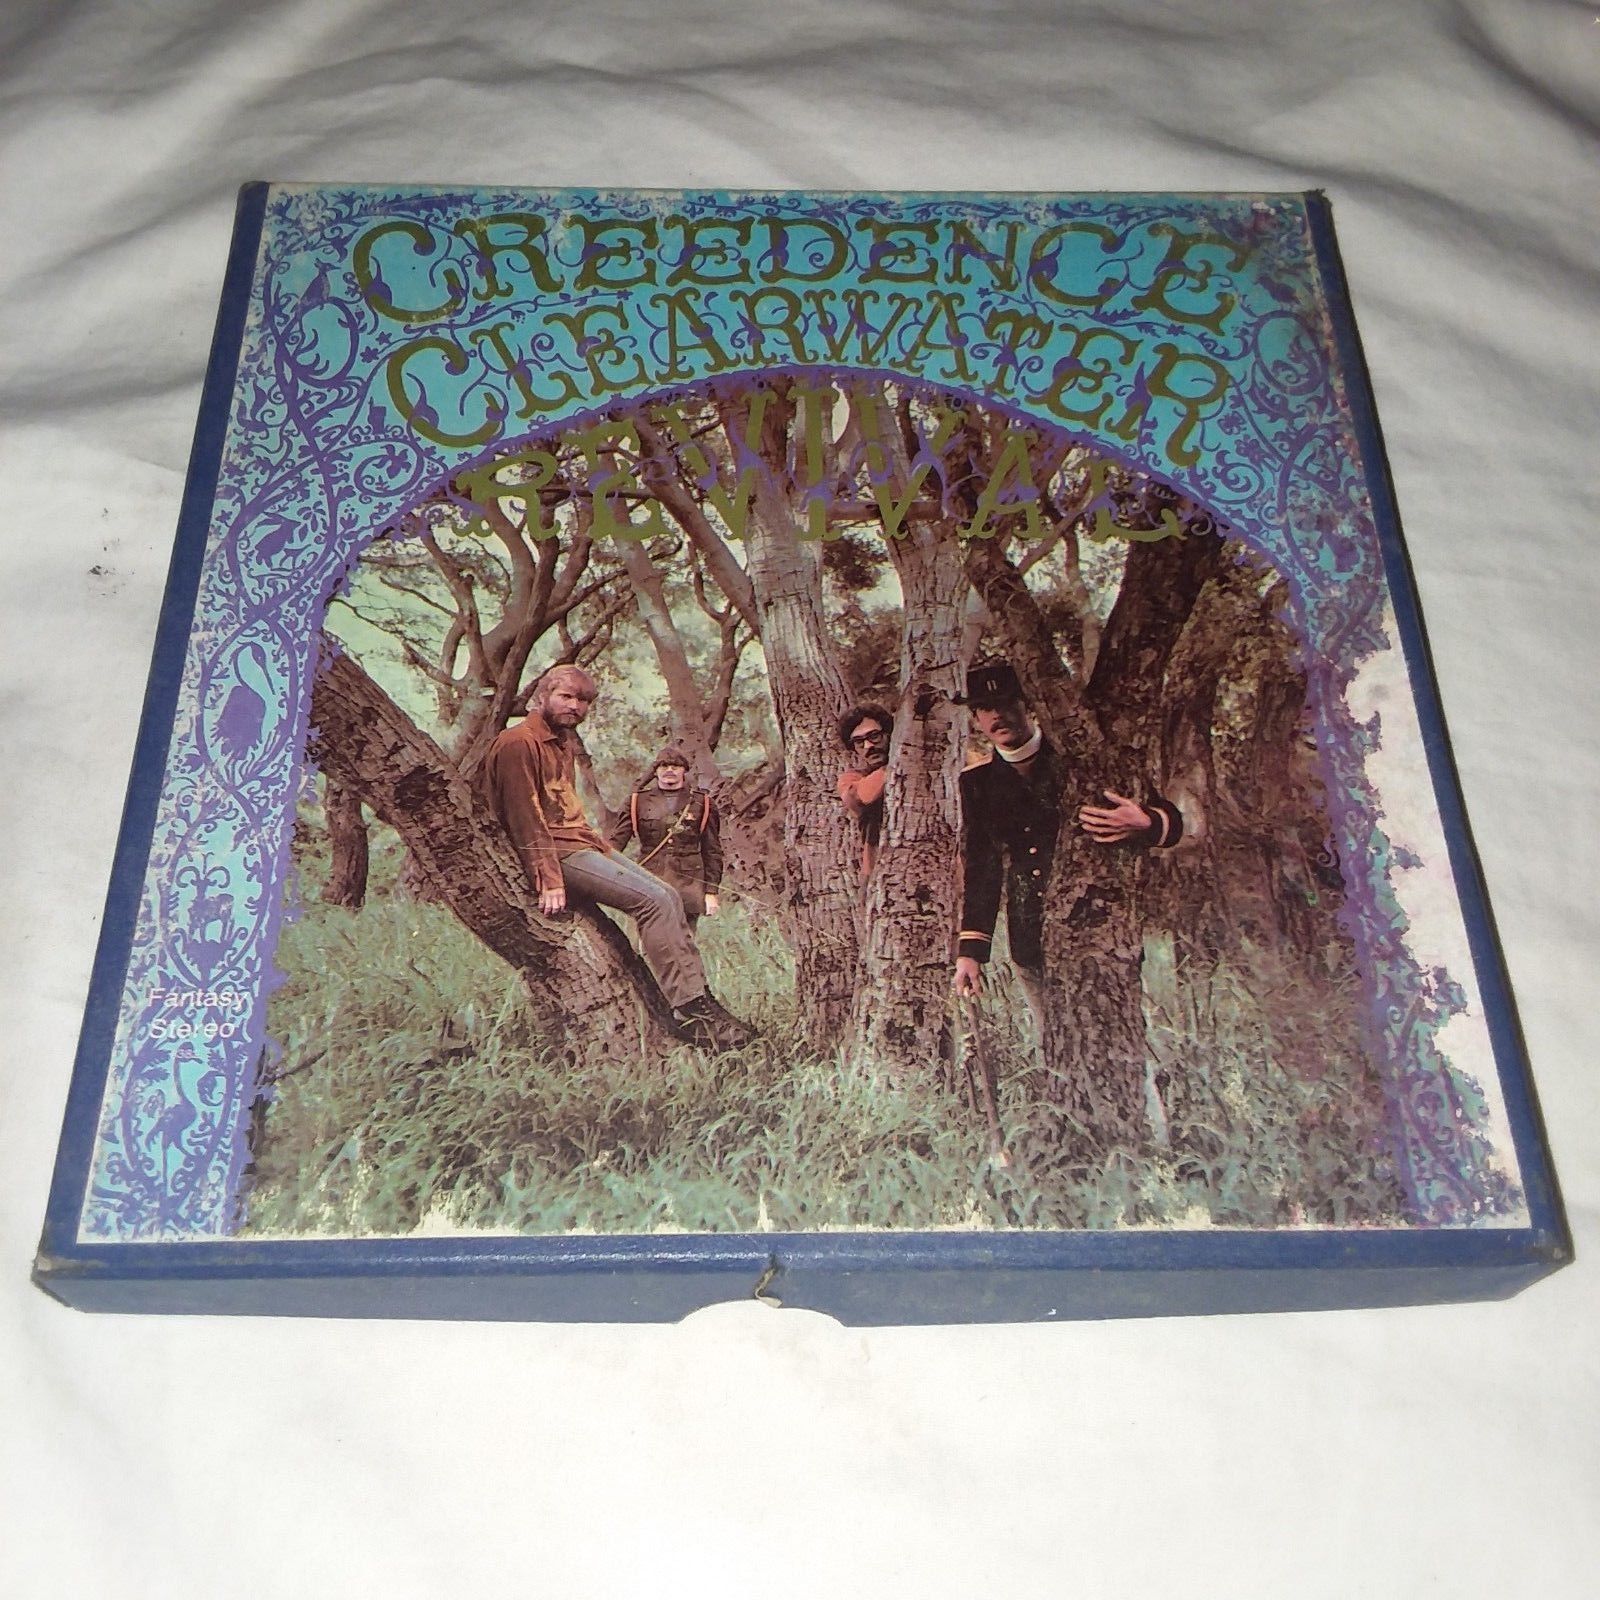  Creedence Clearwater Revival self titled Fantasy Reel To Reel  tape 3 3/4 IPS VG+ - auction details